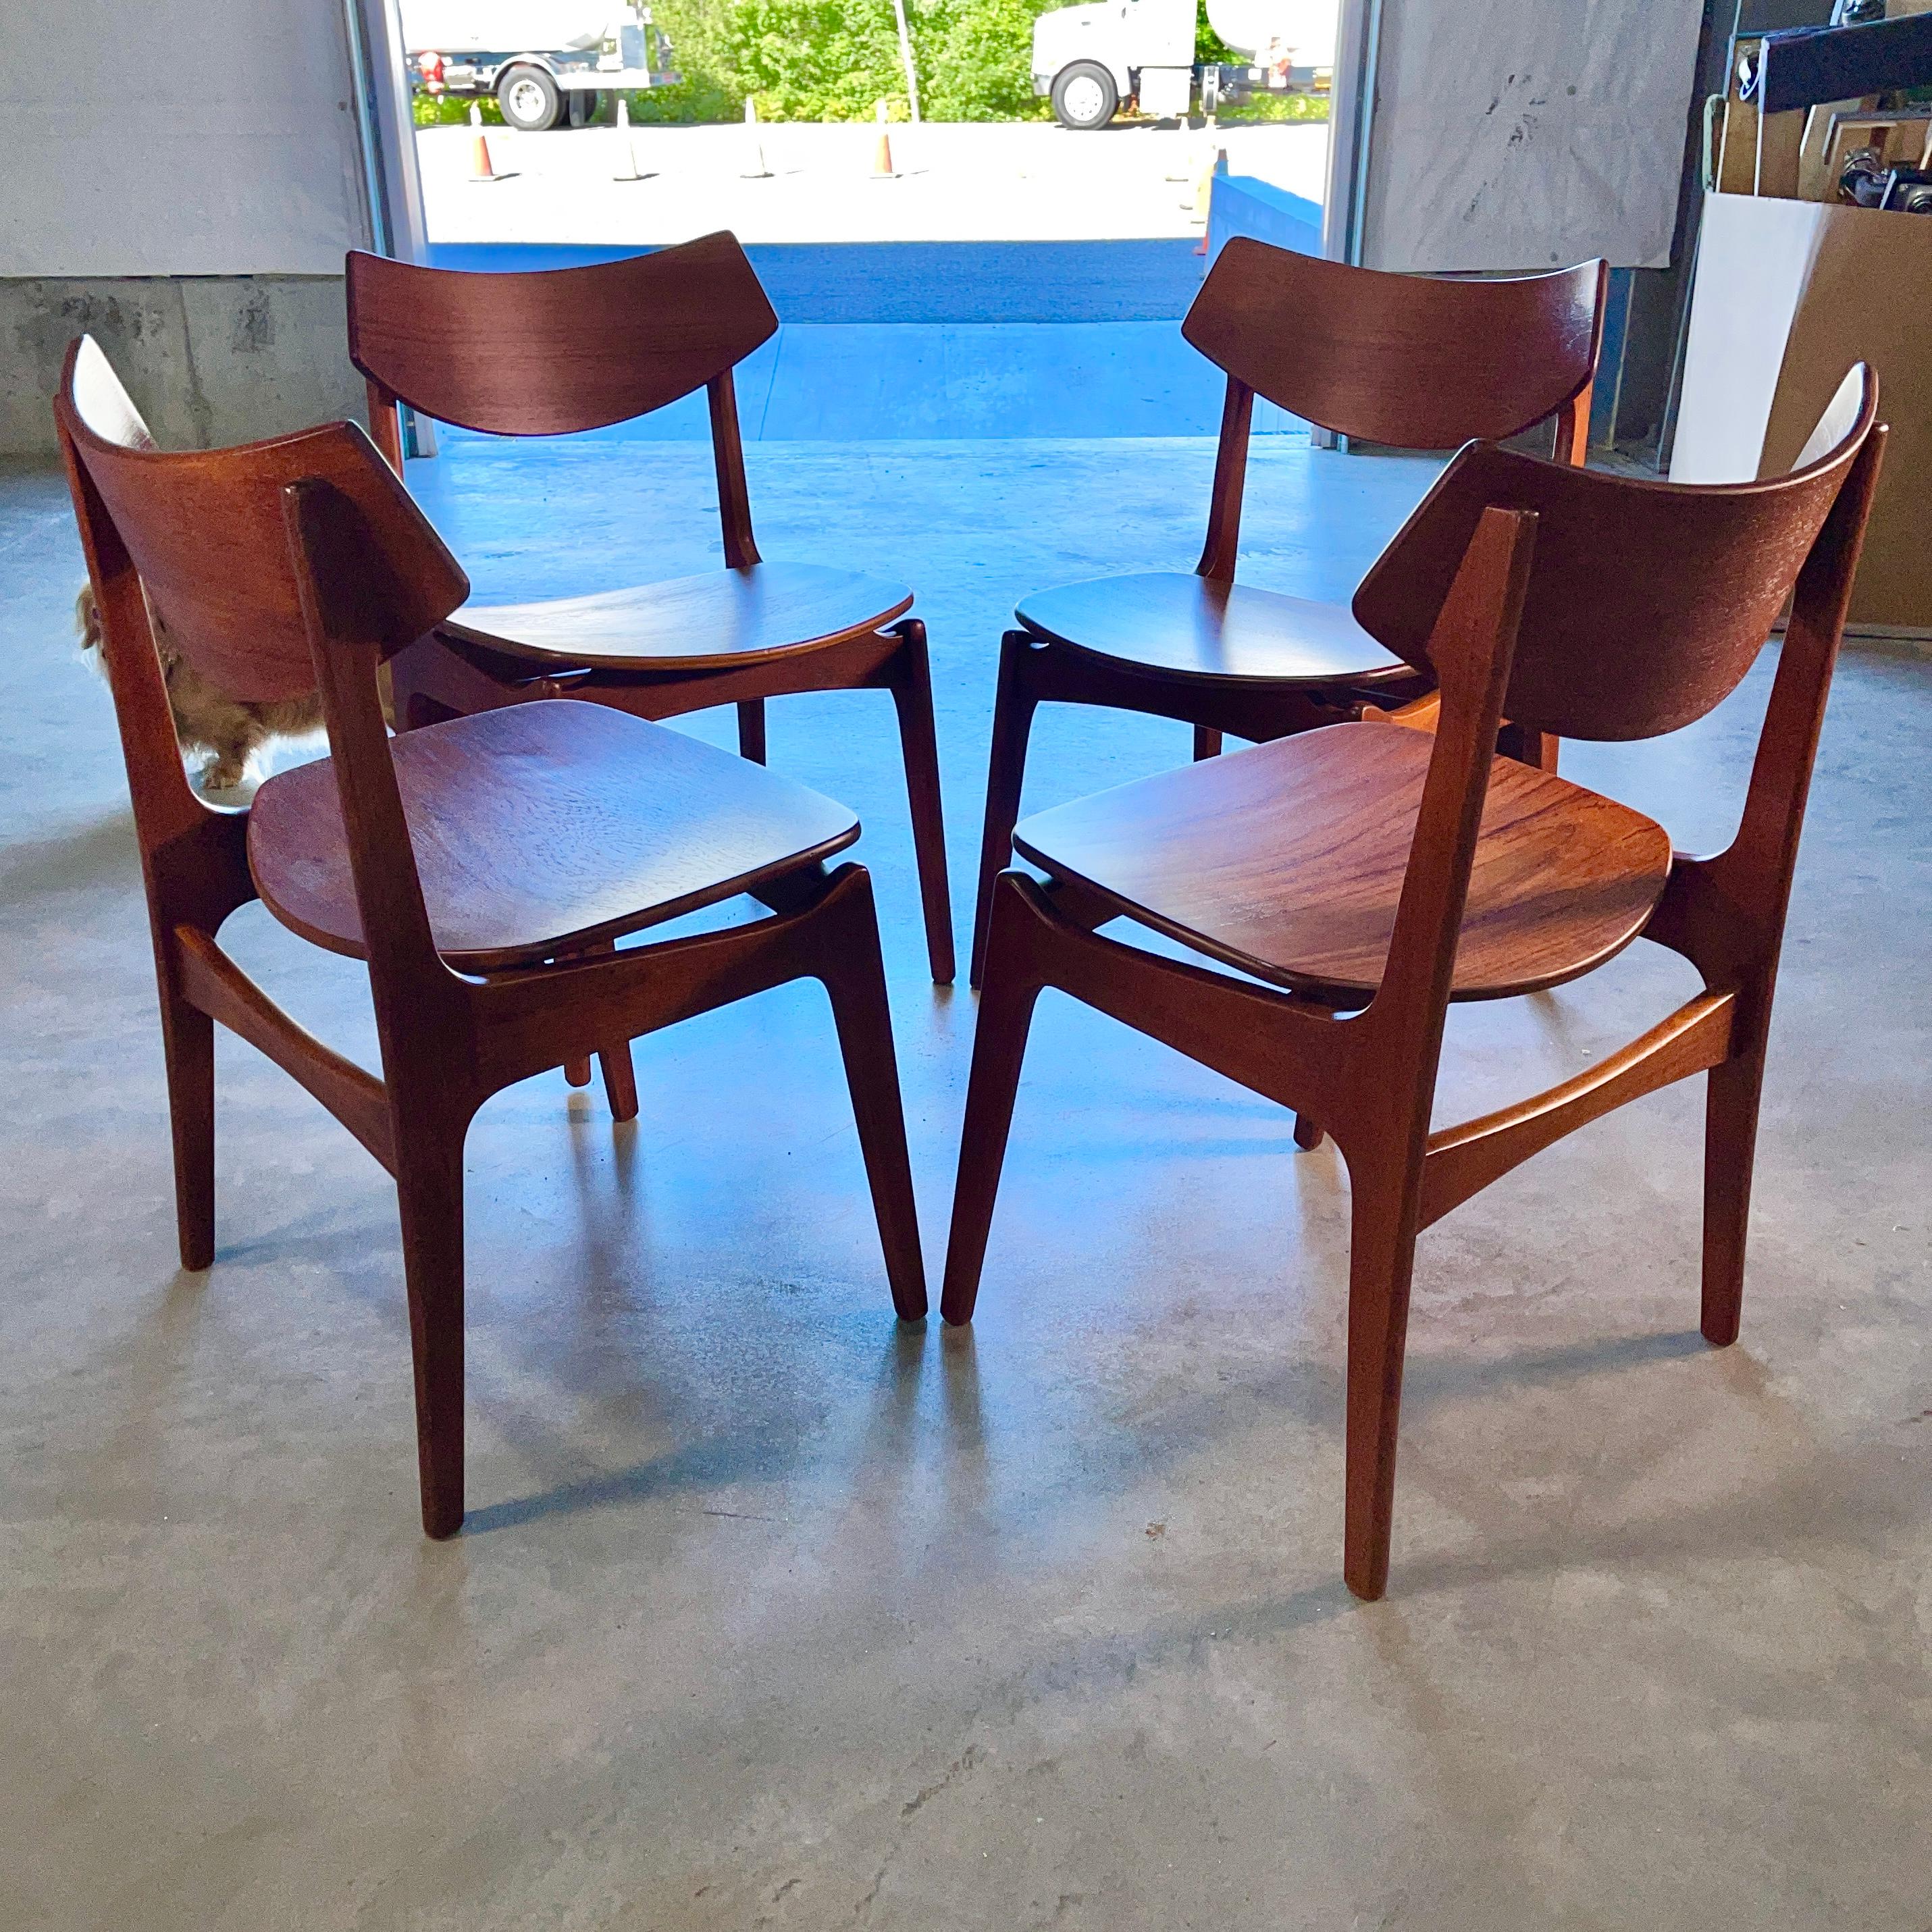 Set of 4 Teak Dining Chairs by Erik Buch for Funder-Schmidt & Madsen, Odense 11